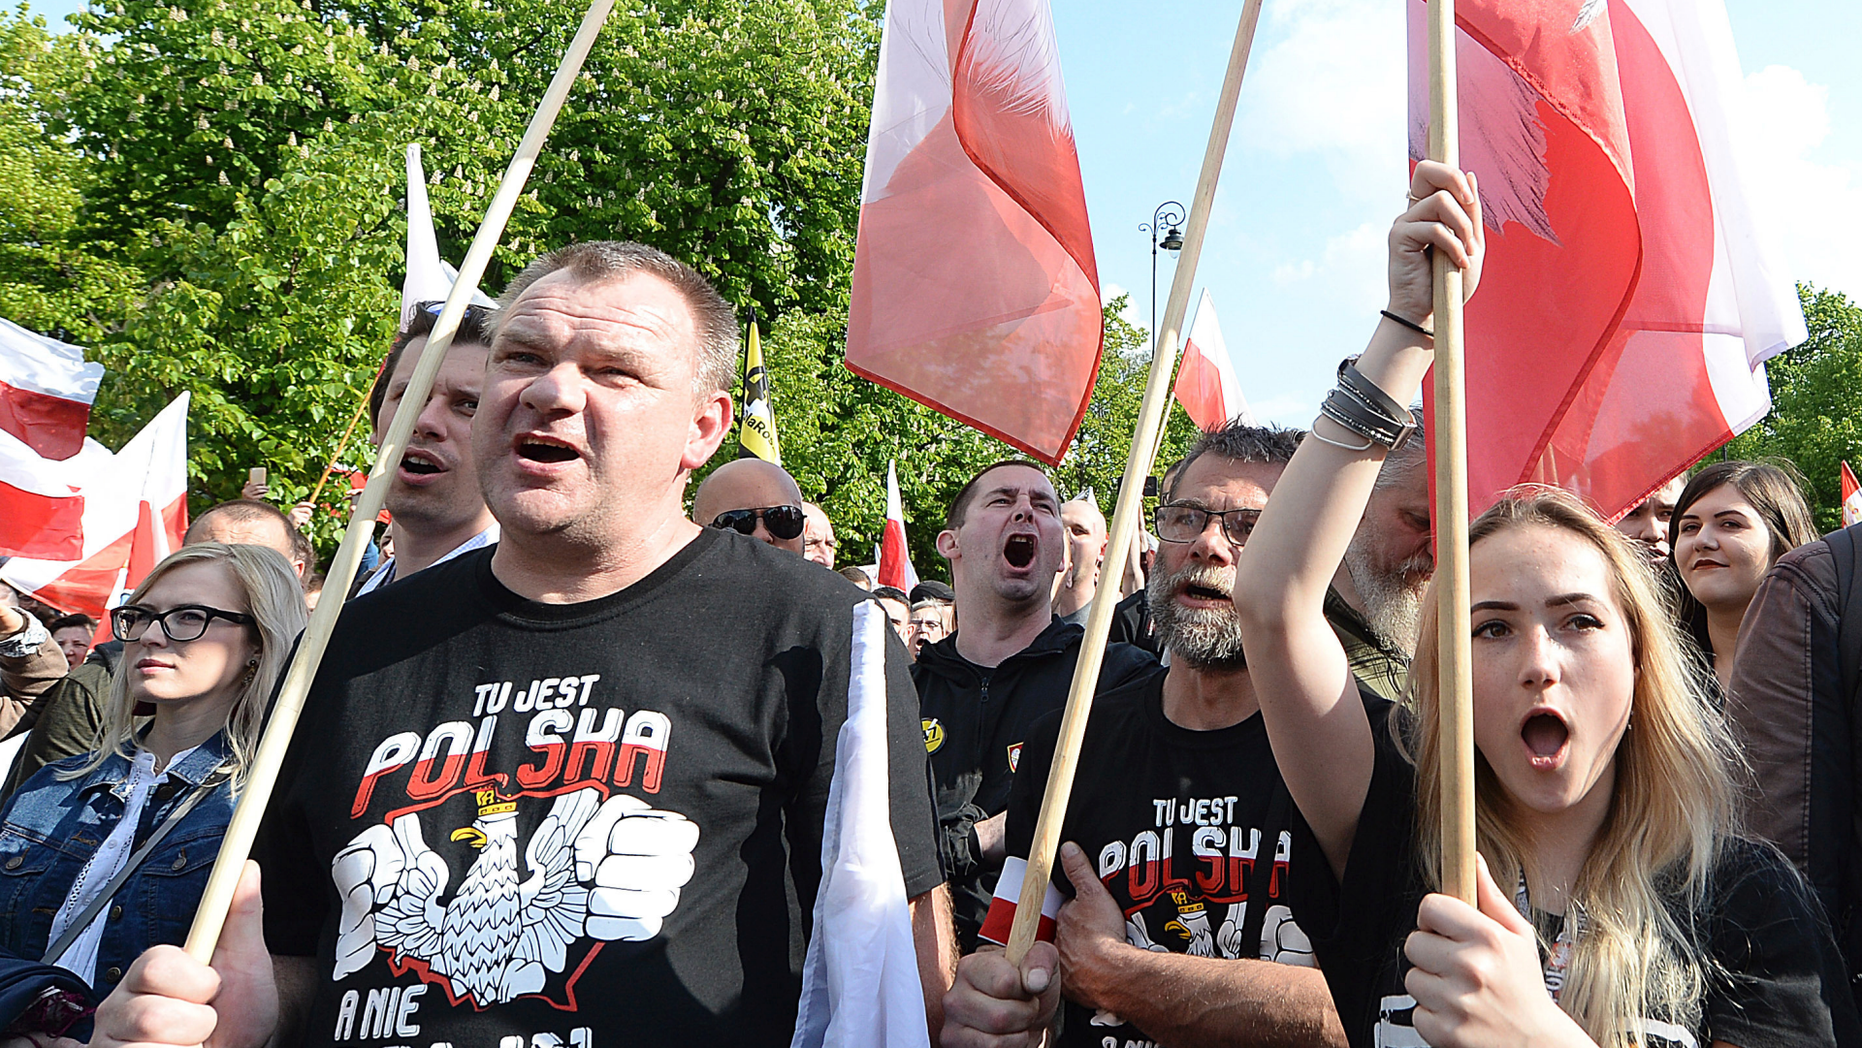 Polish nationalists protest against U.S. over Holocaust claims